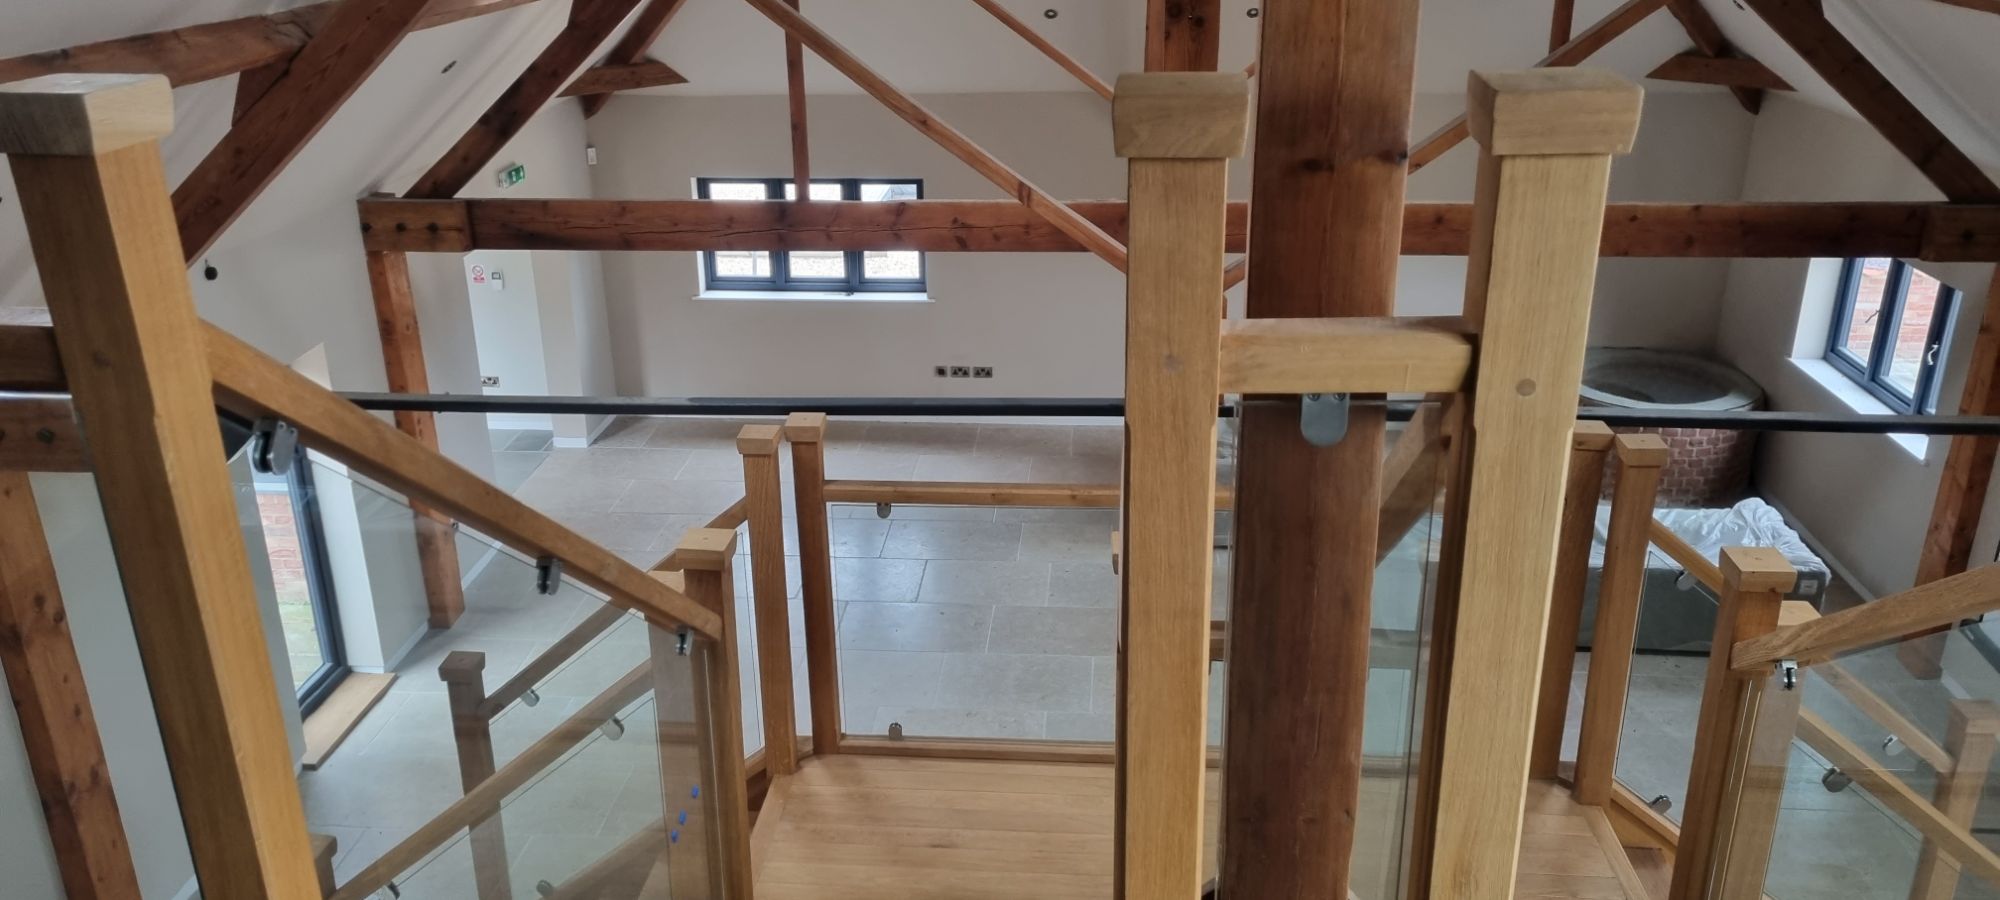 Barn Conversion Specialists - Planning Advice and Professional Support